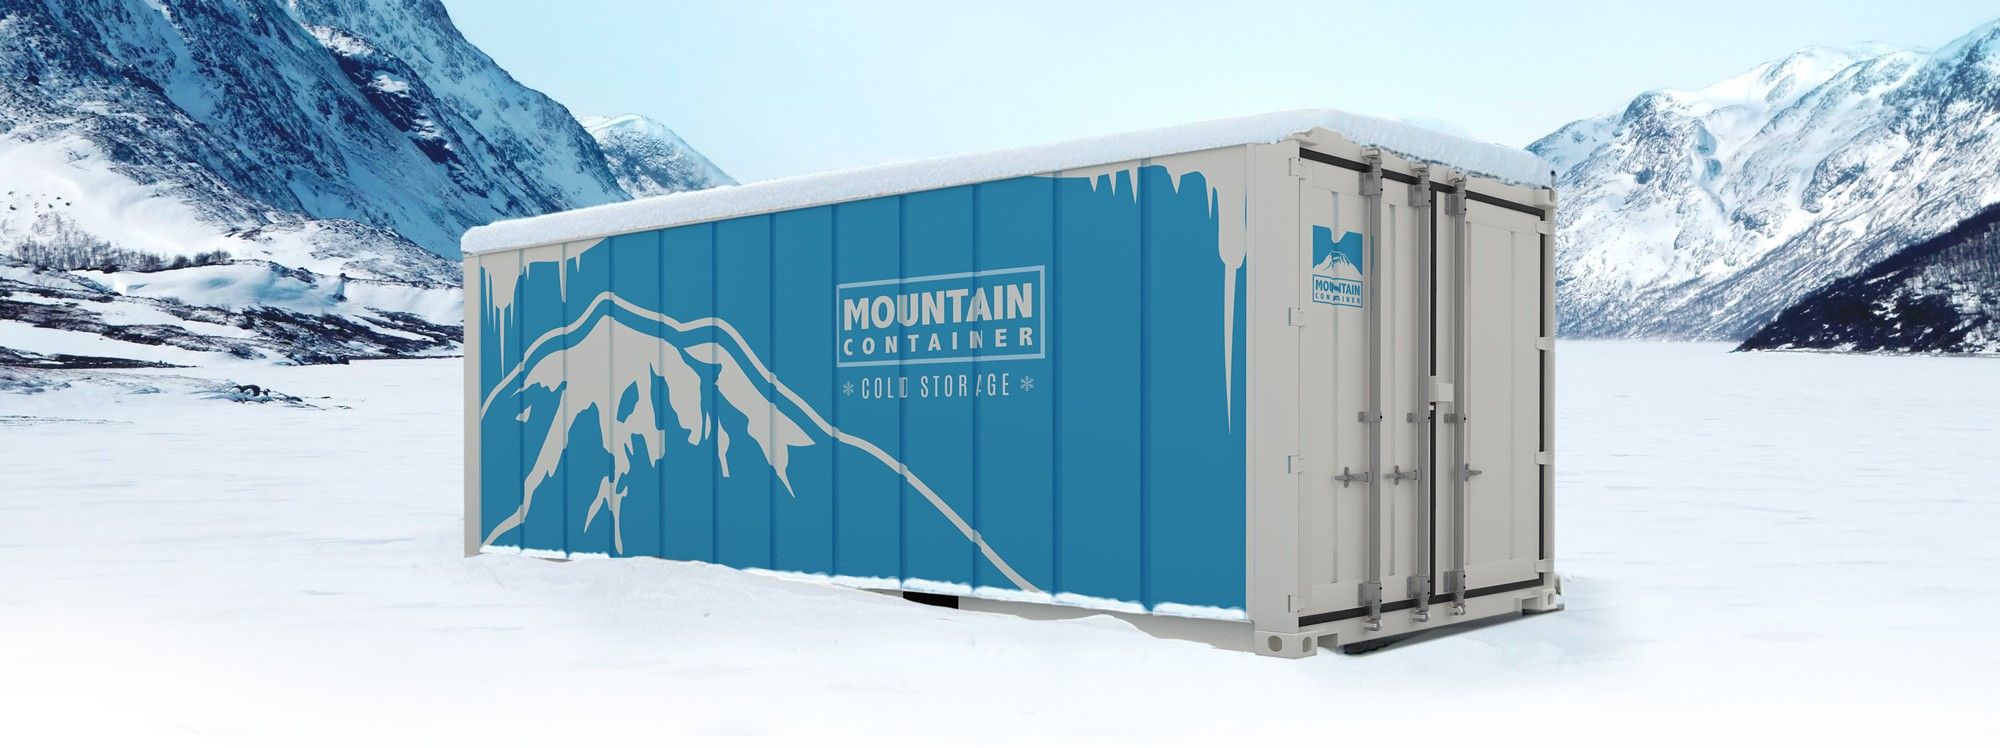 Mountain Container Cold Storage in the snow with mountain backdrop